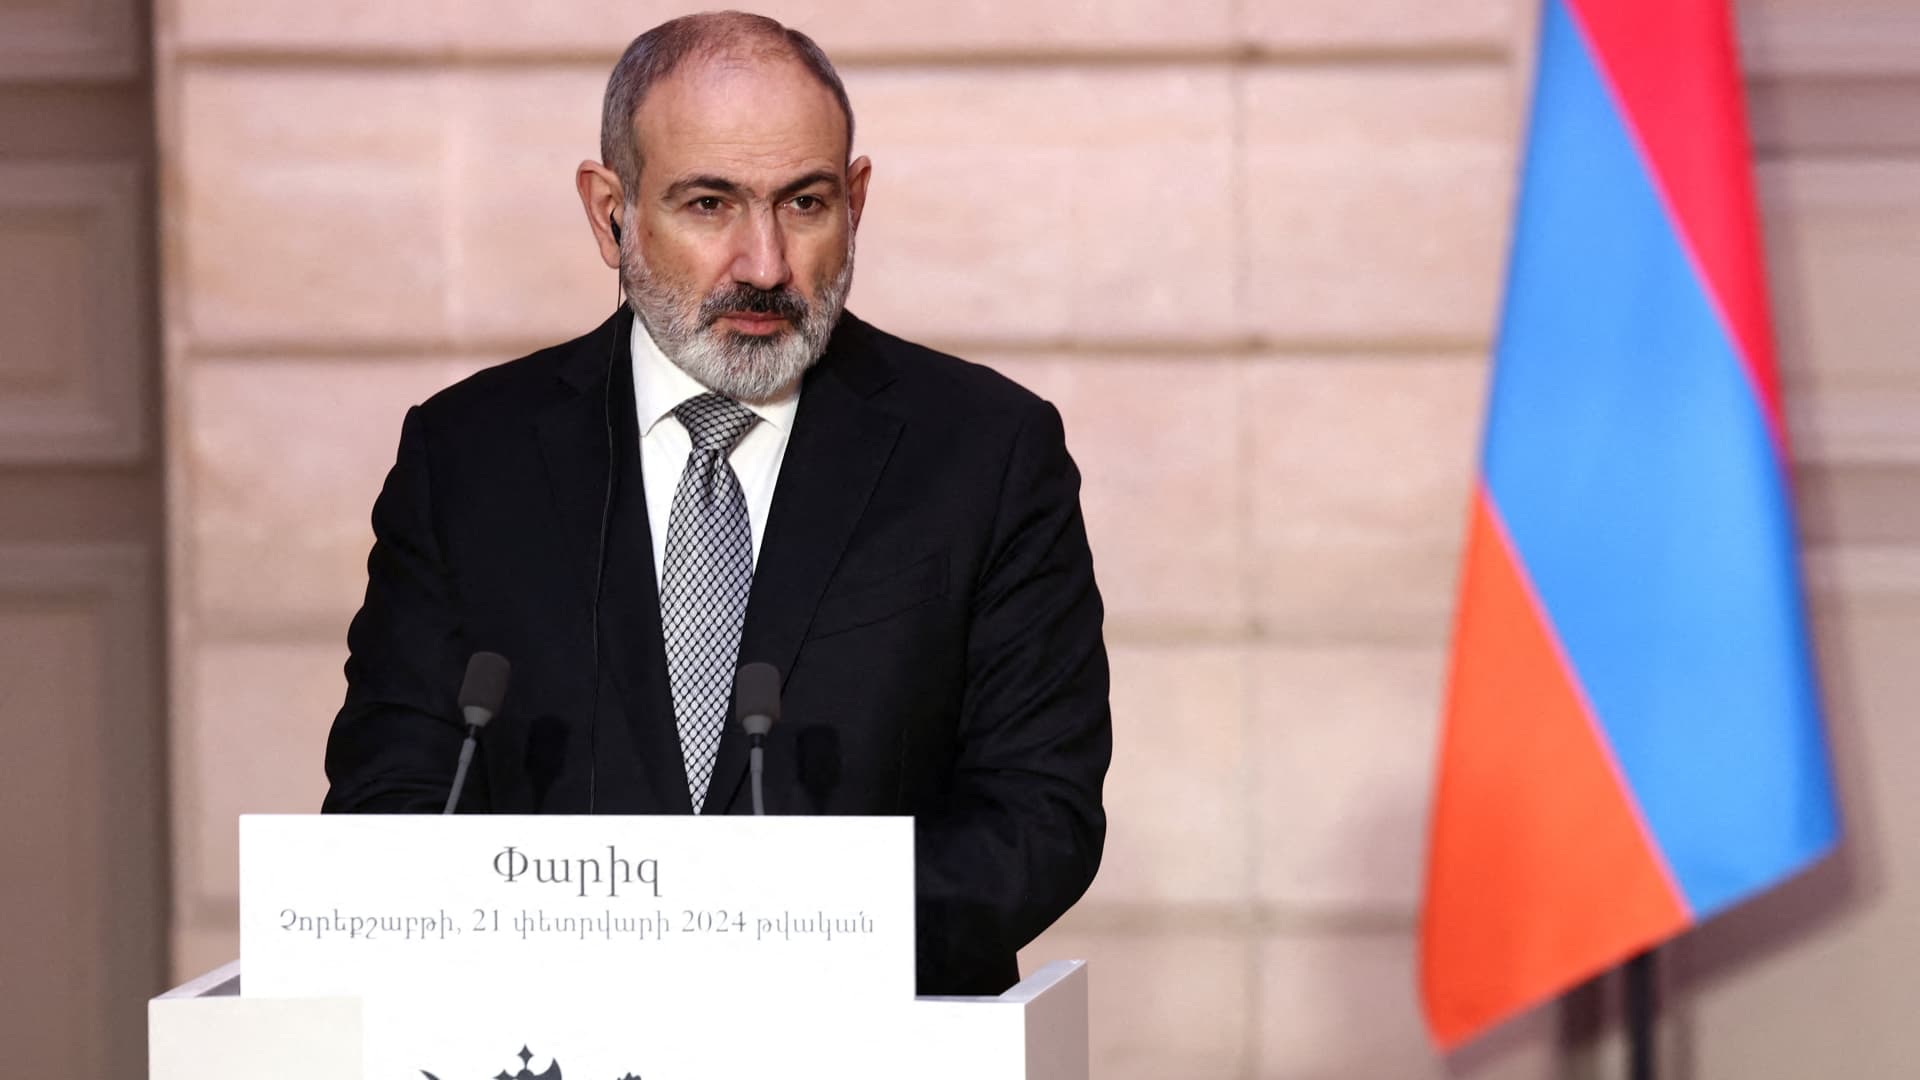 Armenian Prime Minister Nikol Pashinyan speaks during a joint press conference with the French President as part of a meeting on the sidelines of the entry ceremony for Armenian Resistance fighter Missak Manouchian and his resistance comrades into the Pantheon, at the Elysee Palace, in Paris on February 21, 2024.